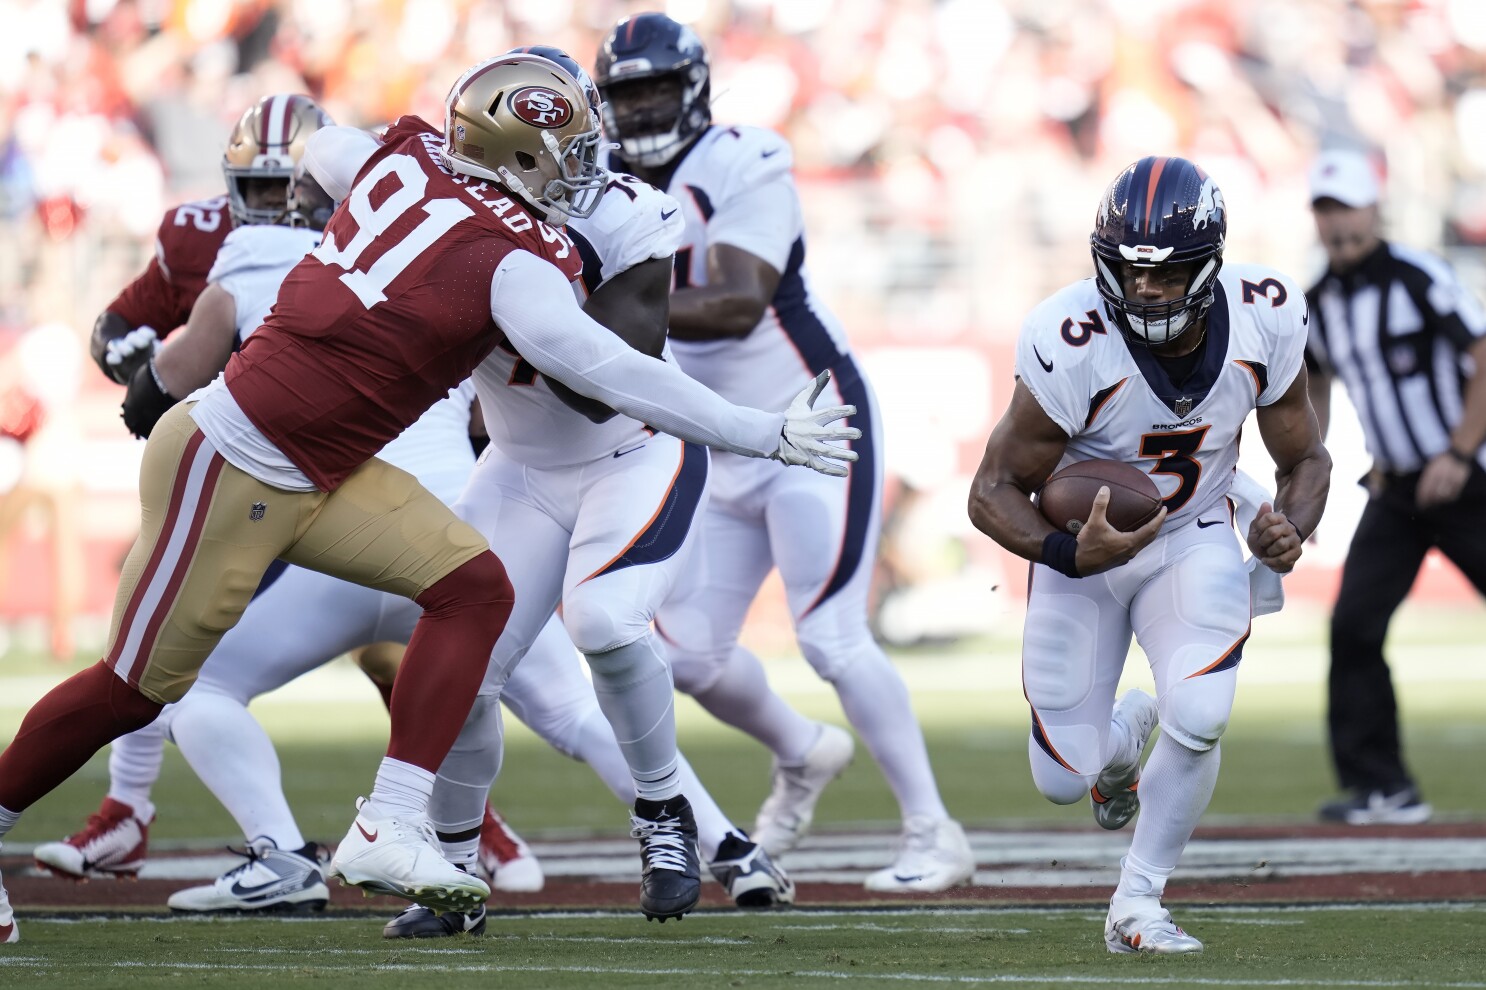 49ers rally late behind Trey Lance to beat Broncos 21-20 on rookie Jake  Moody's kick